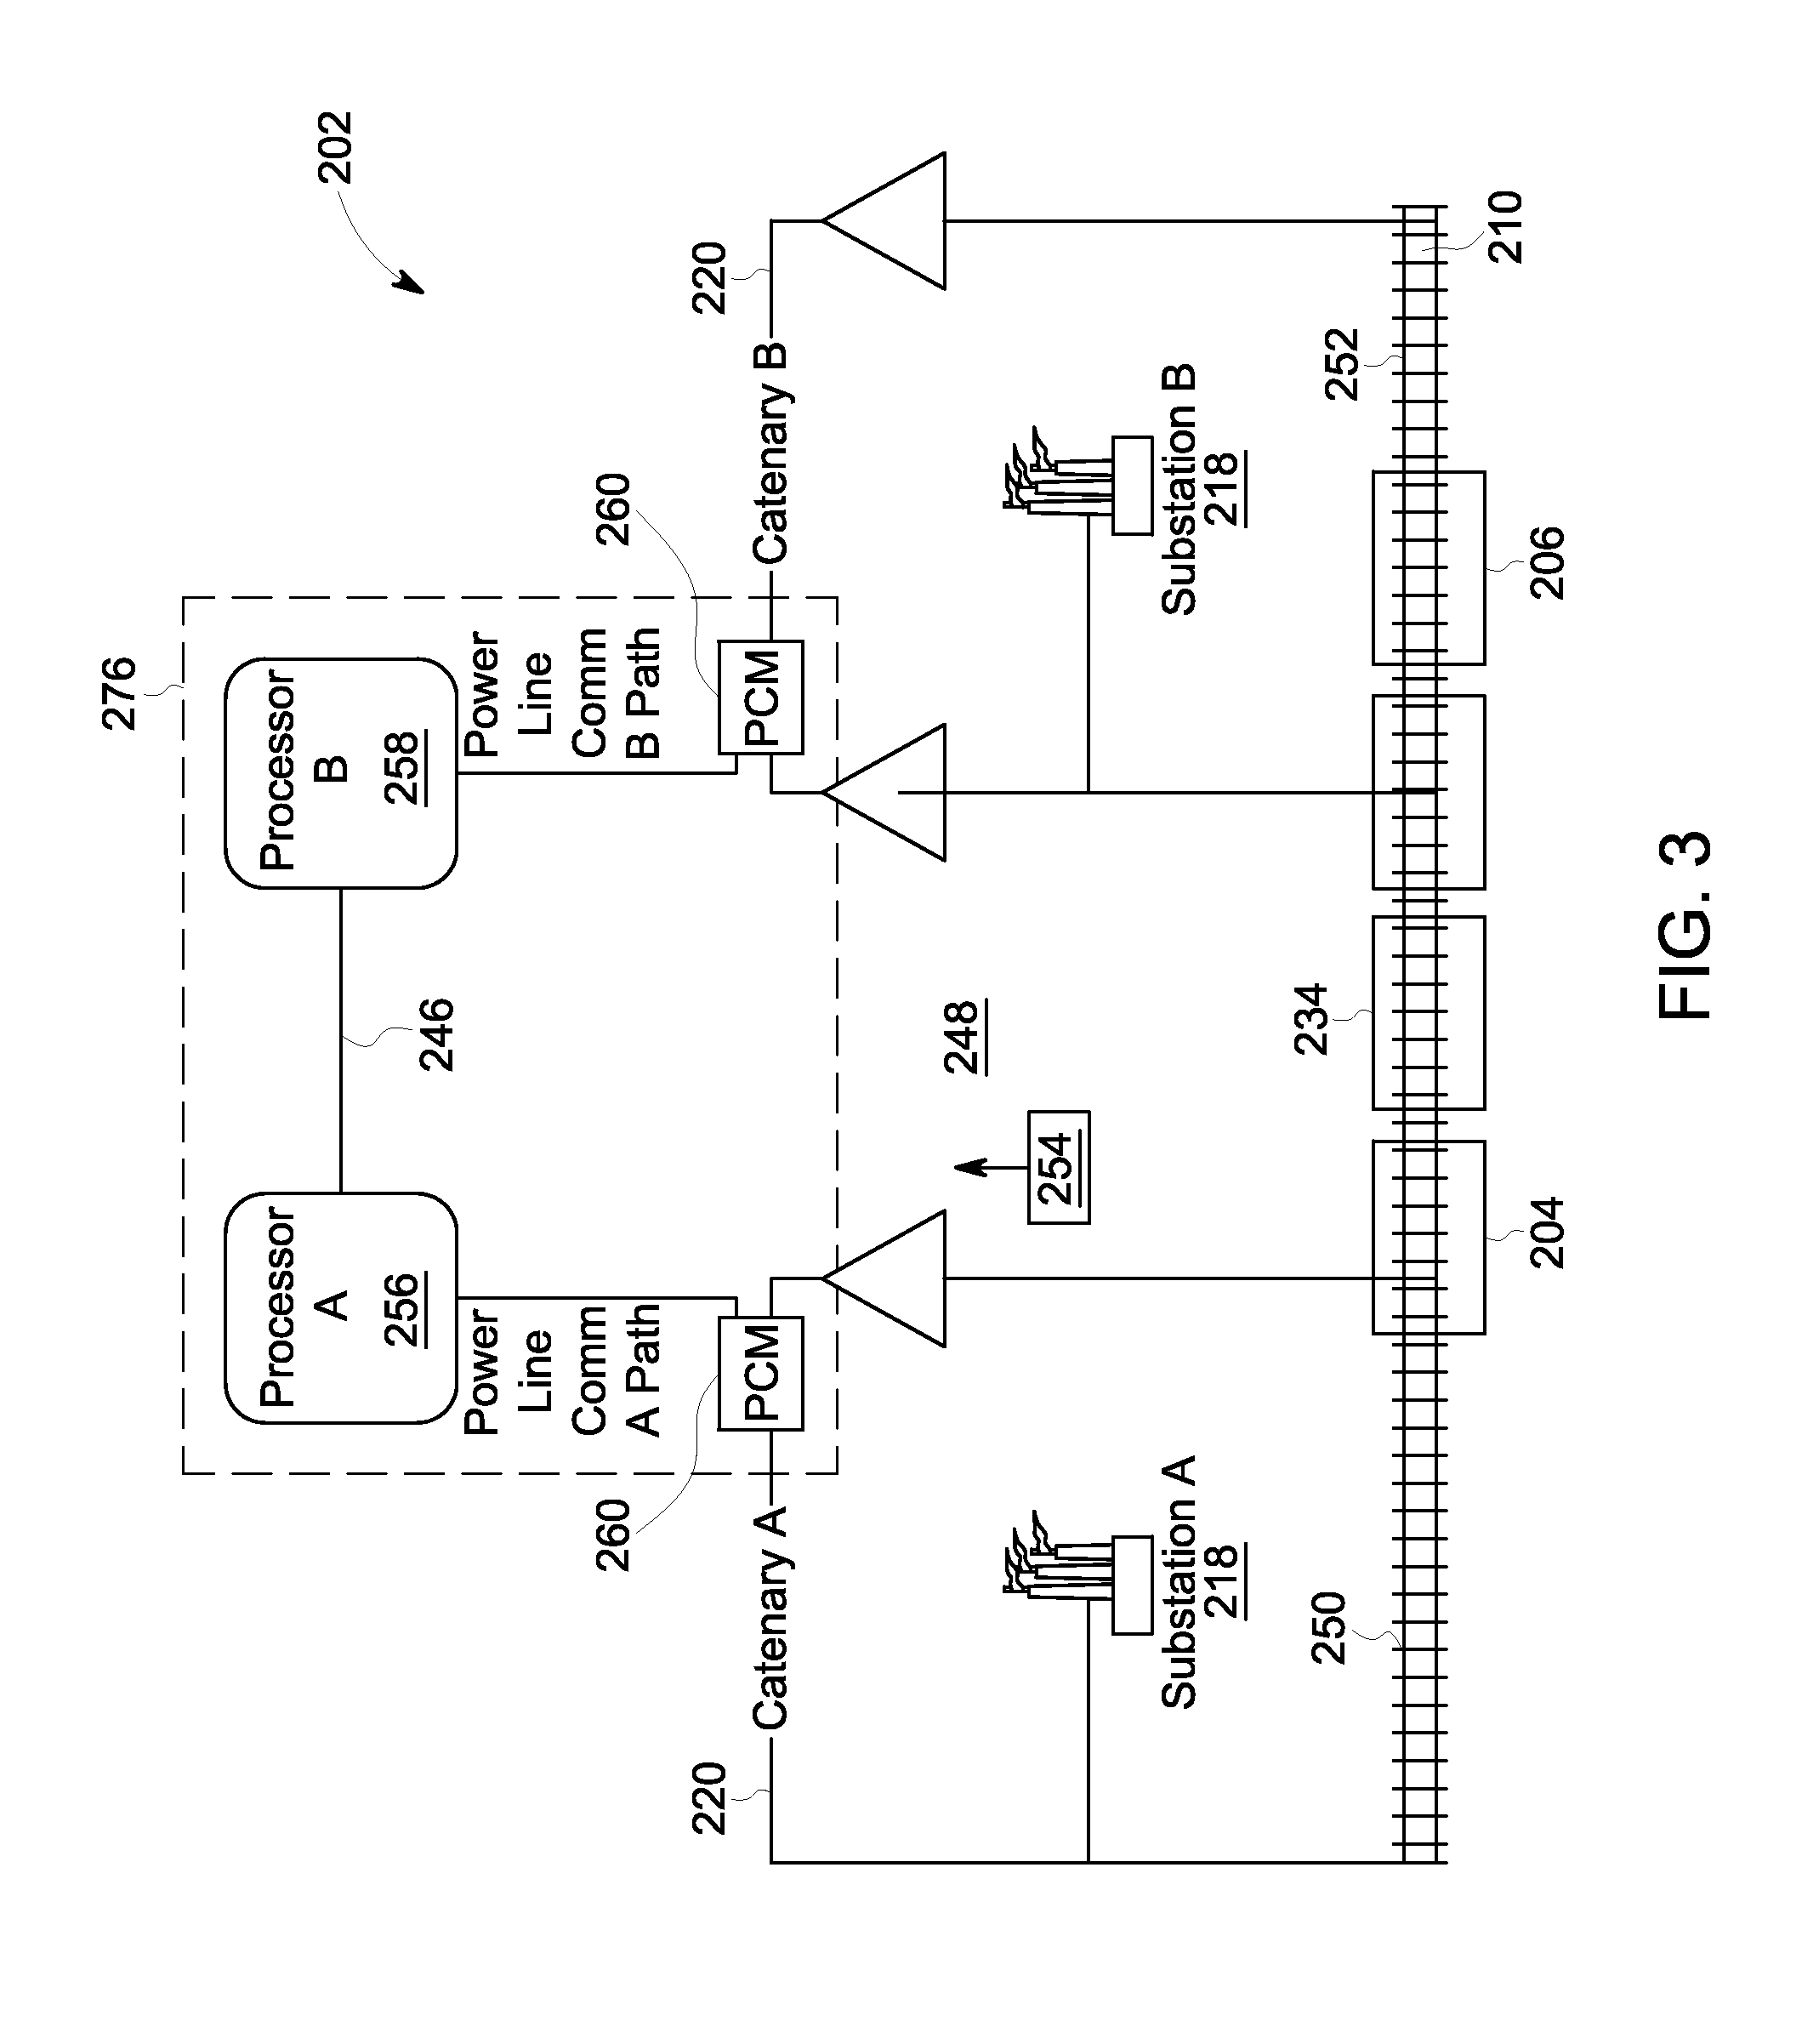 Communication system and method for a rail vehicle consist